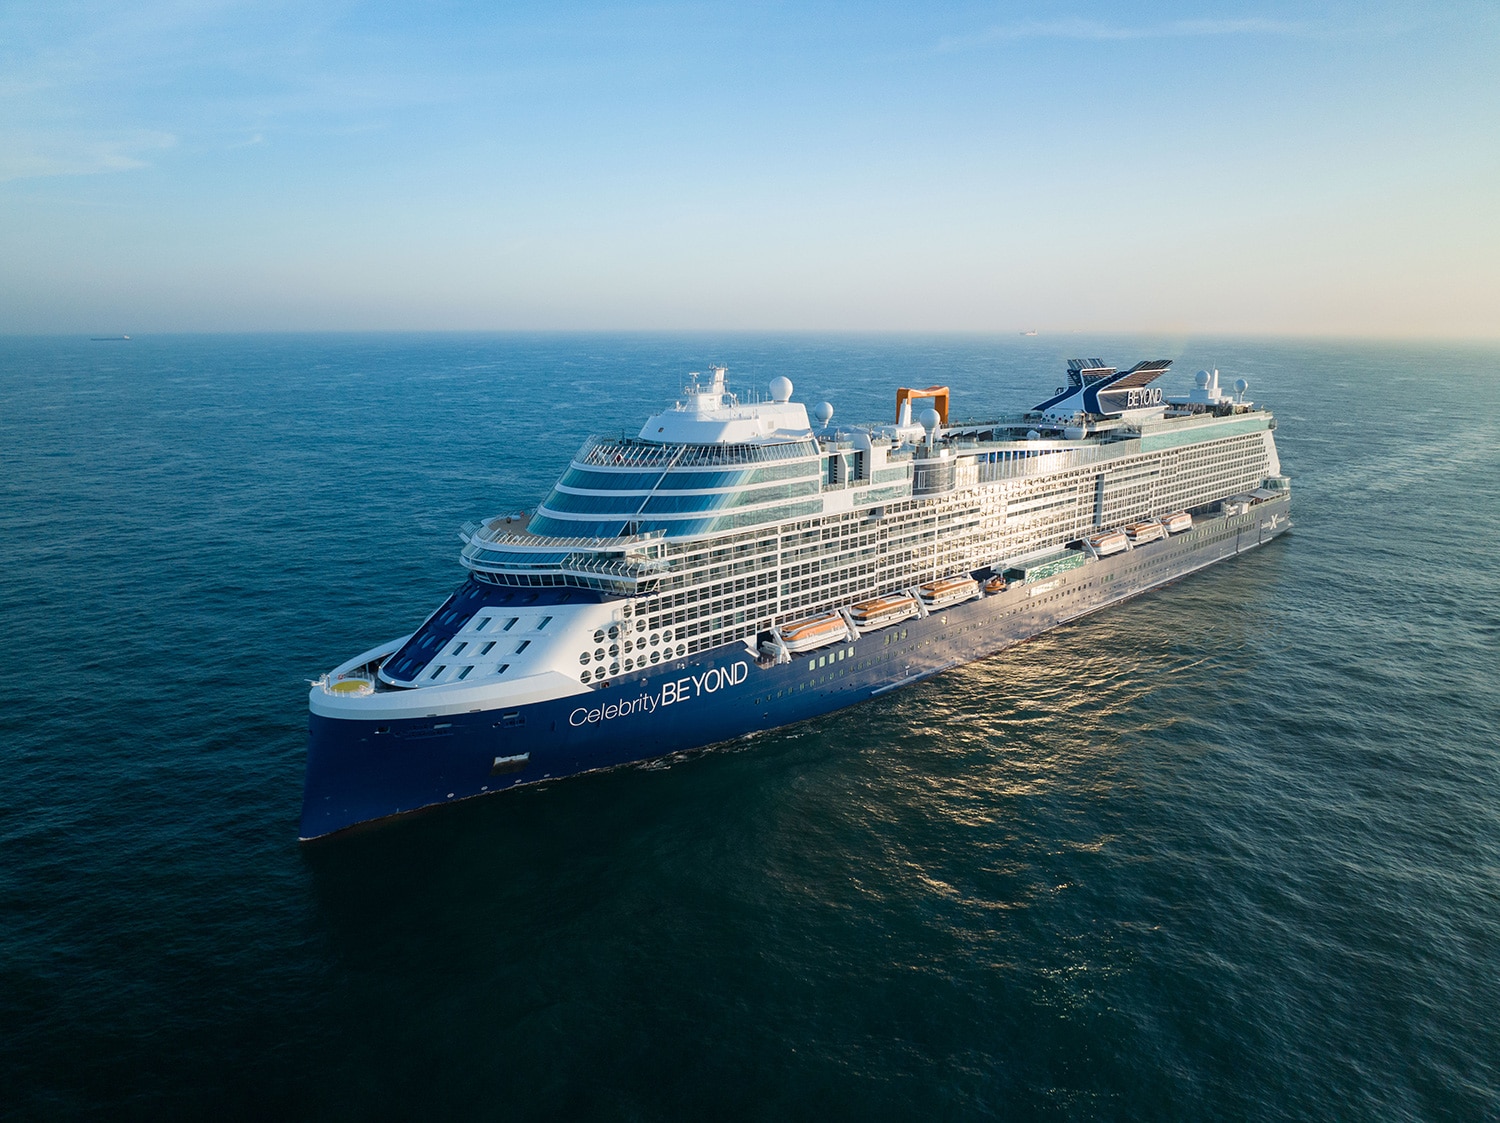 An aerial exterior view of the Celebrity Beyond cruise ship from Celebrity Cruises.